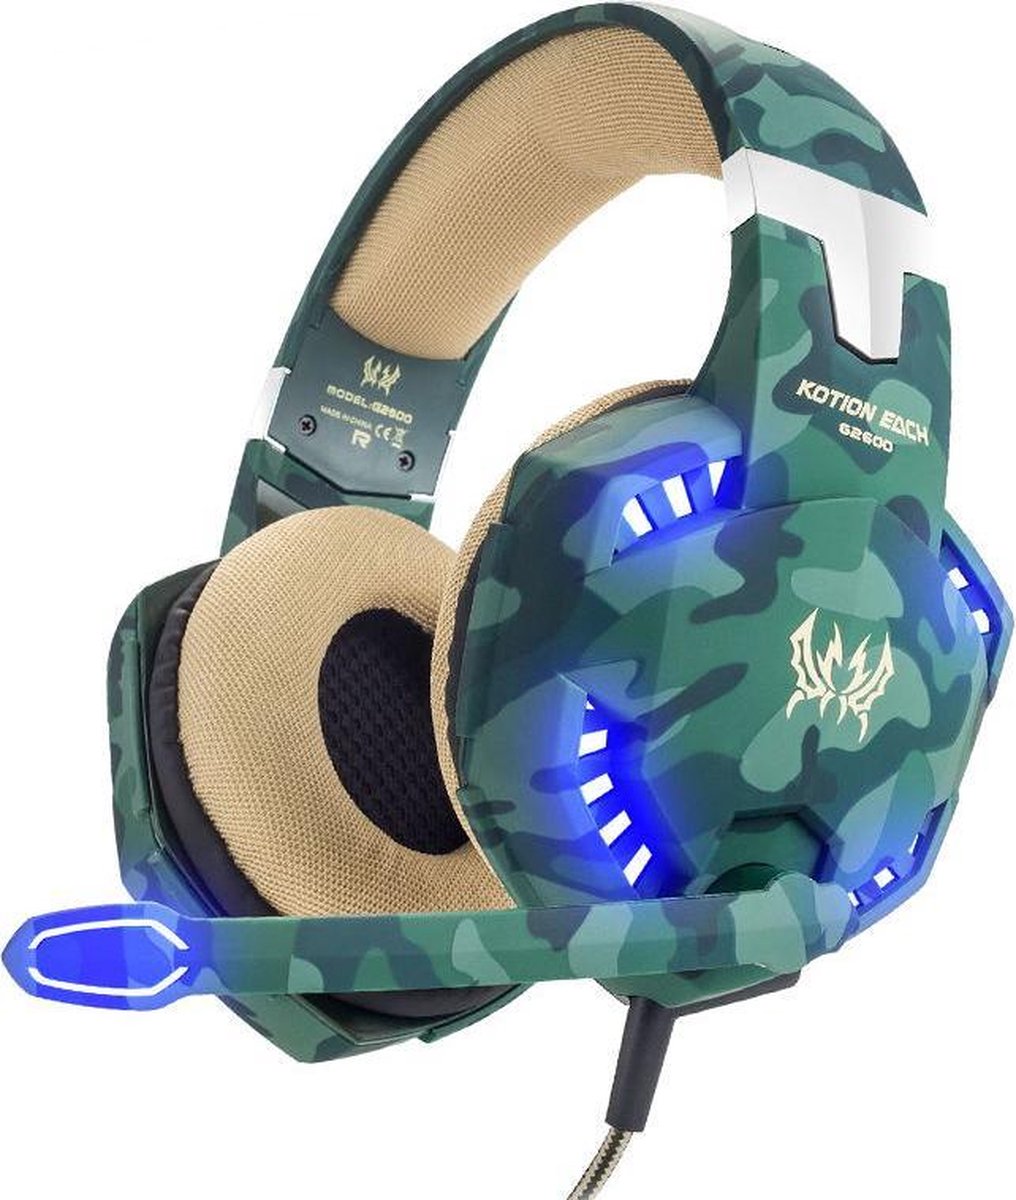 KOTION EACH G2600 - Gaming Headset - PS4 + PC - Camouflage Groen - KOTION EACH